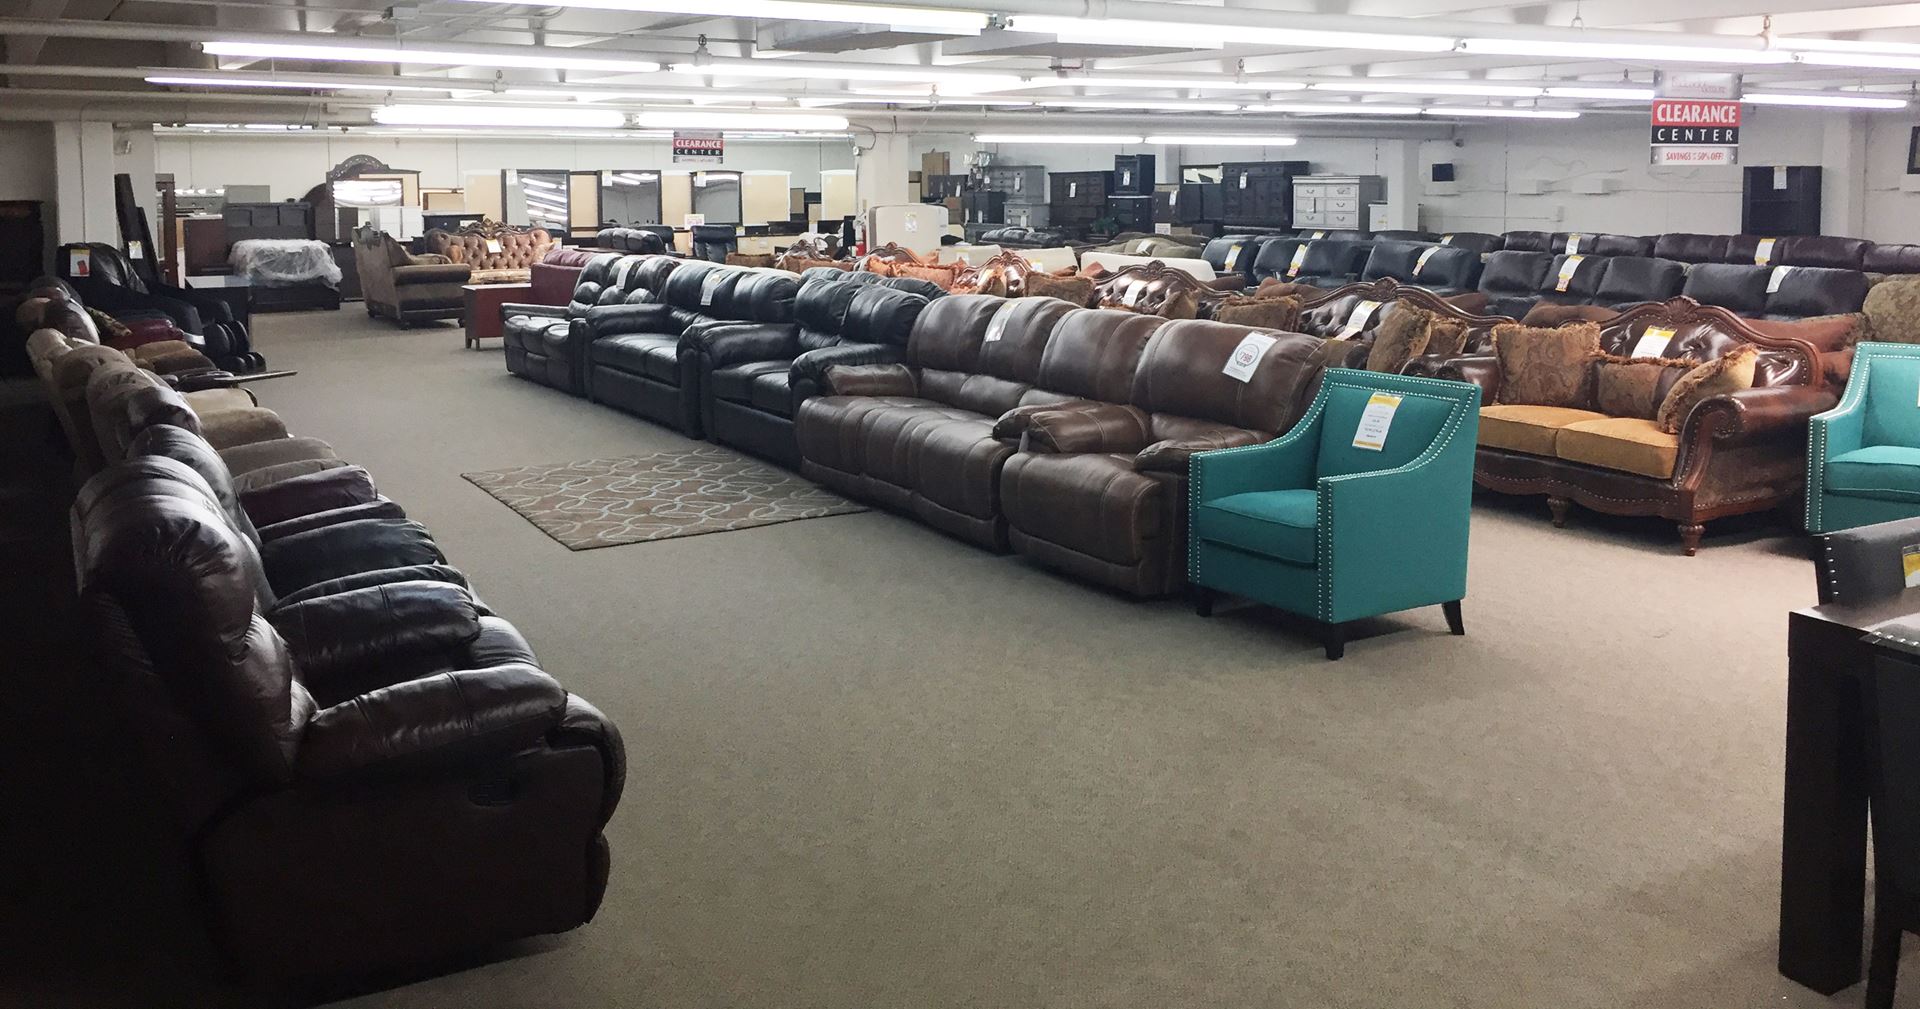 Get the Best Home Furnishing Options from our Furniture Store in Fort